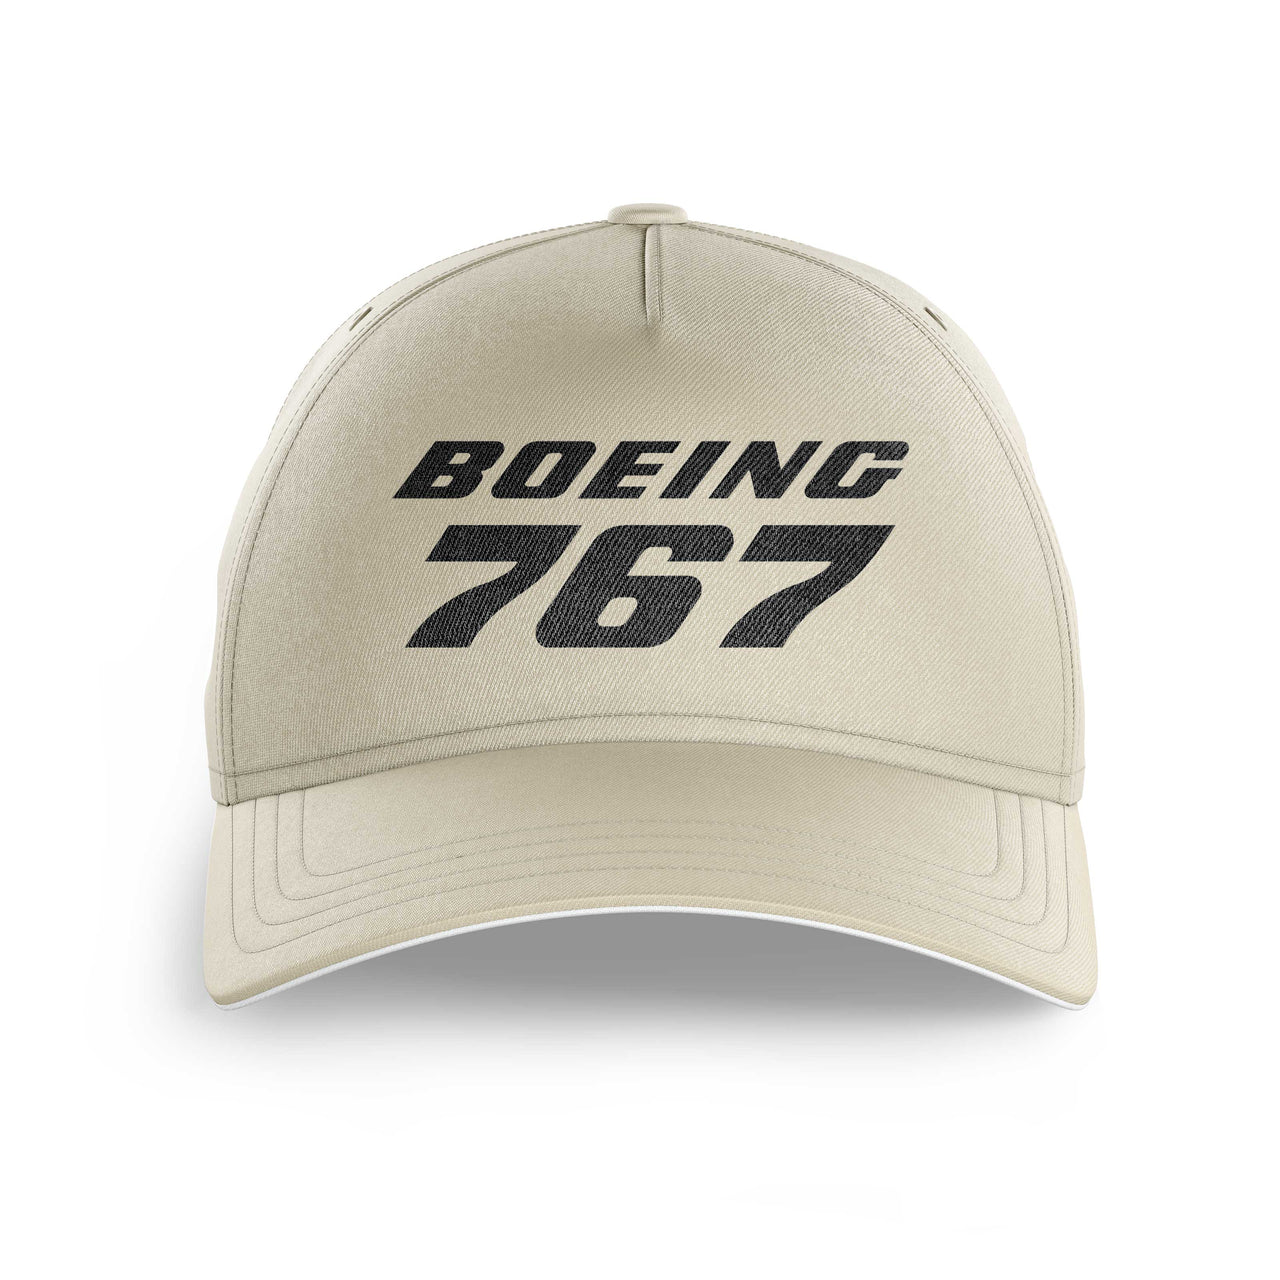 Boeing 767 & Text Printed Hats